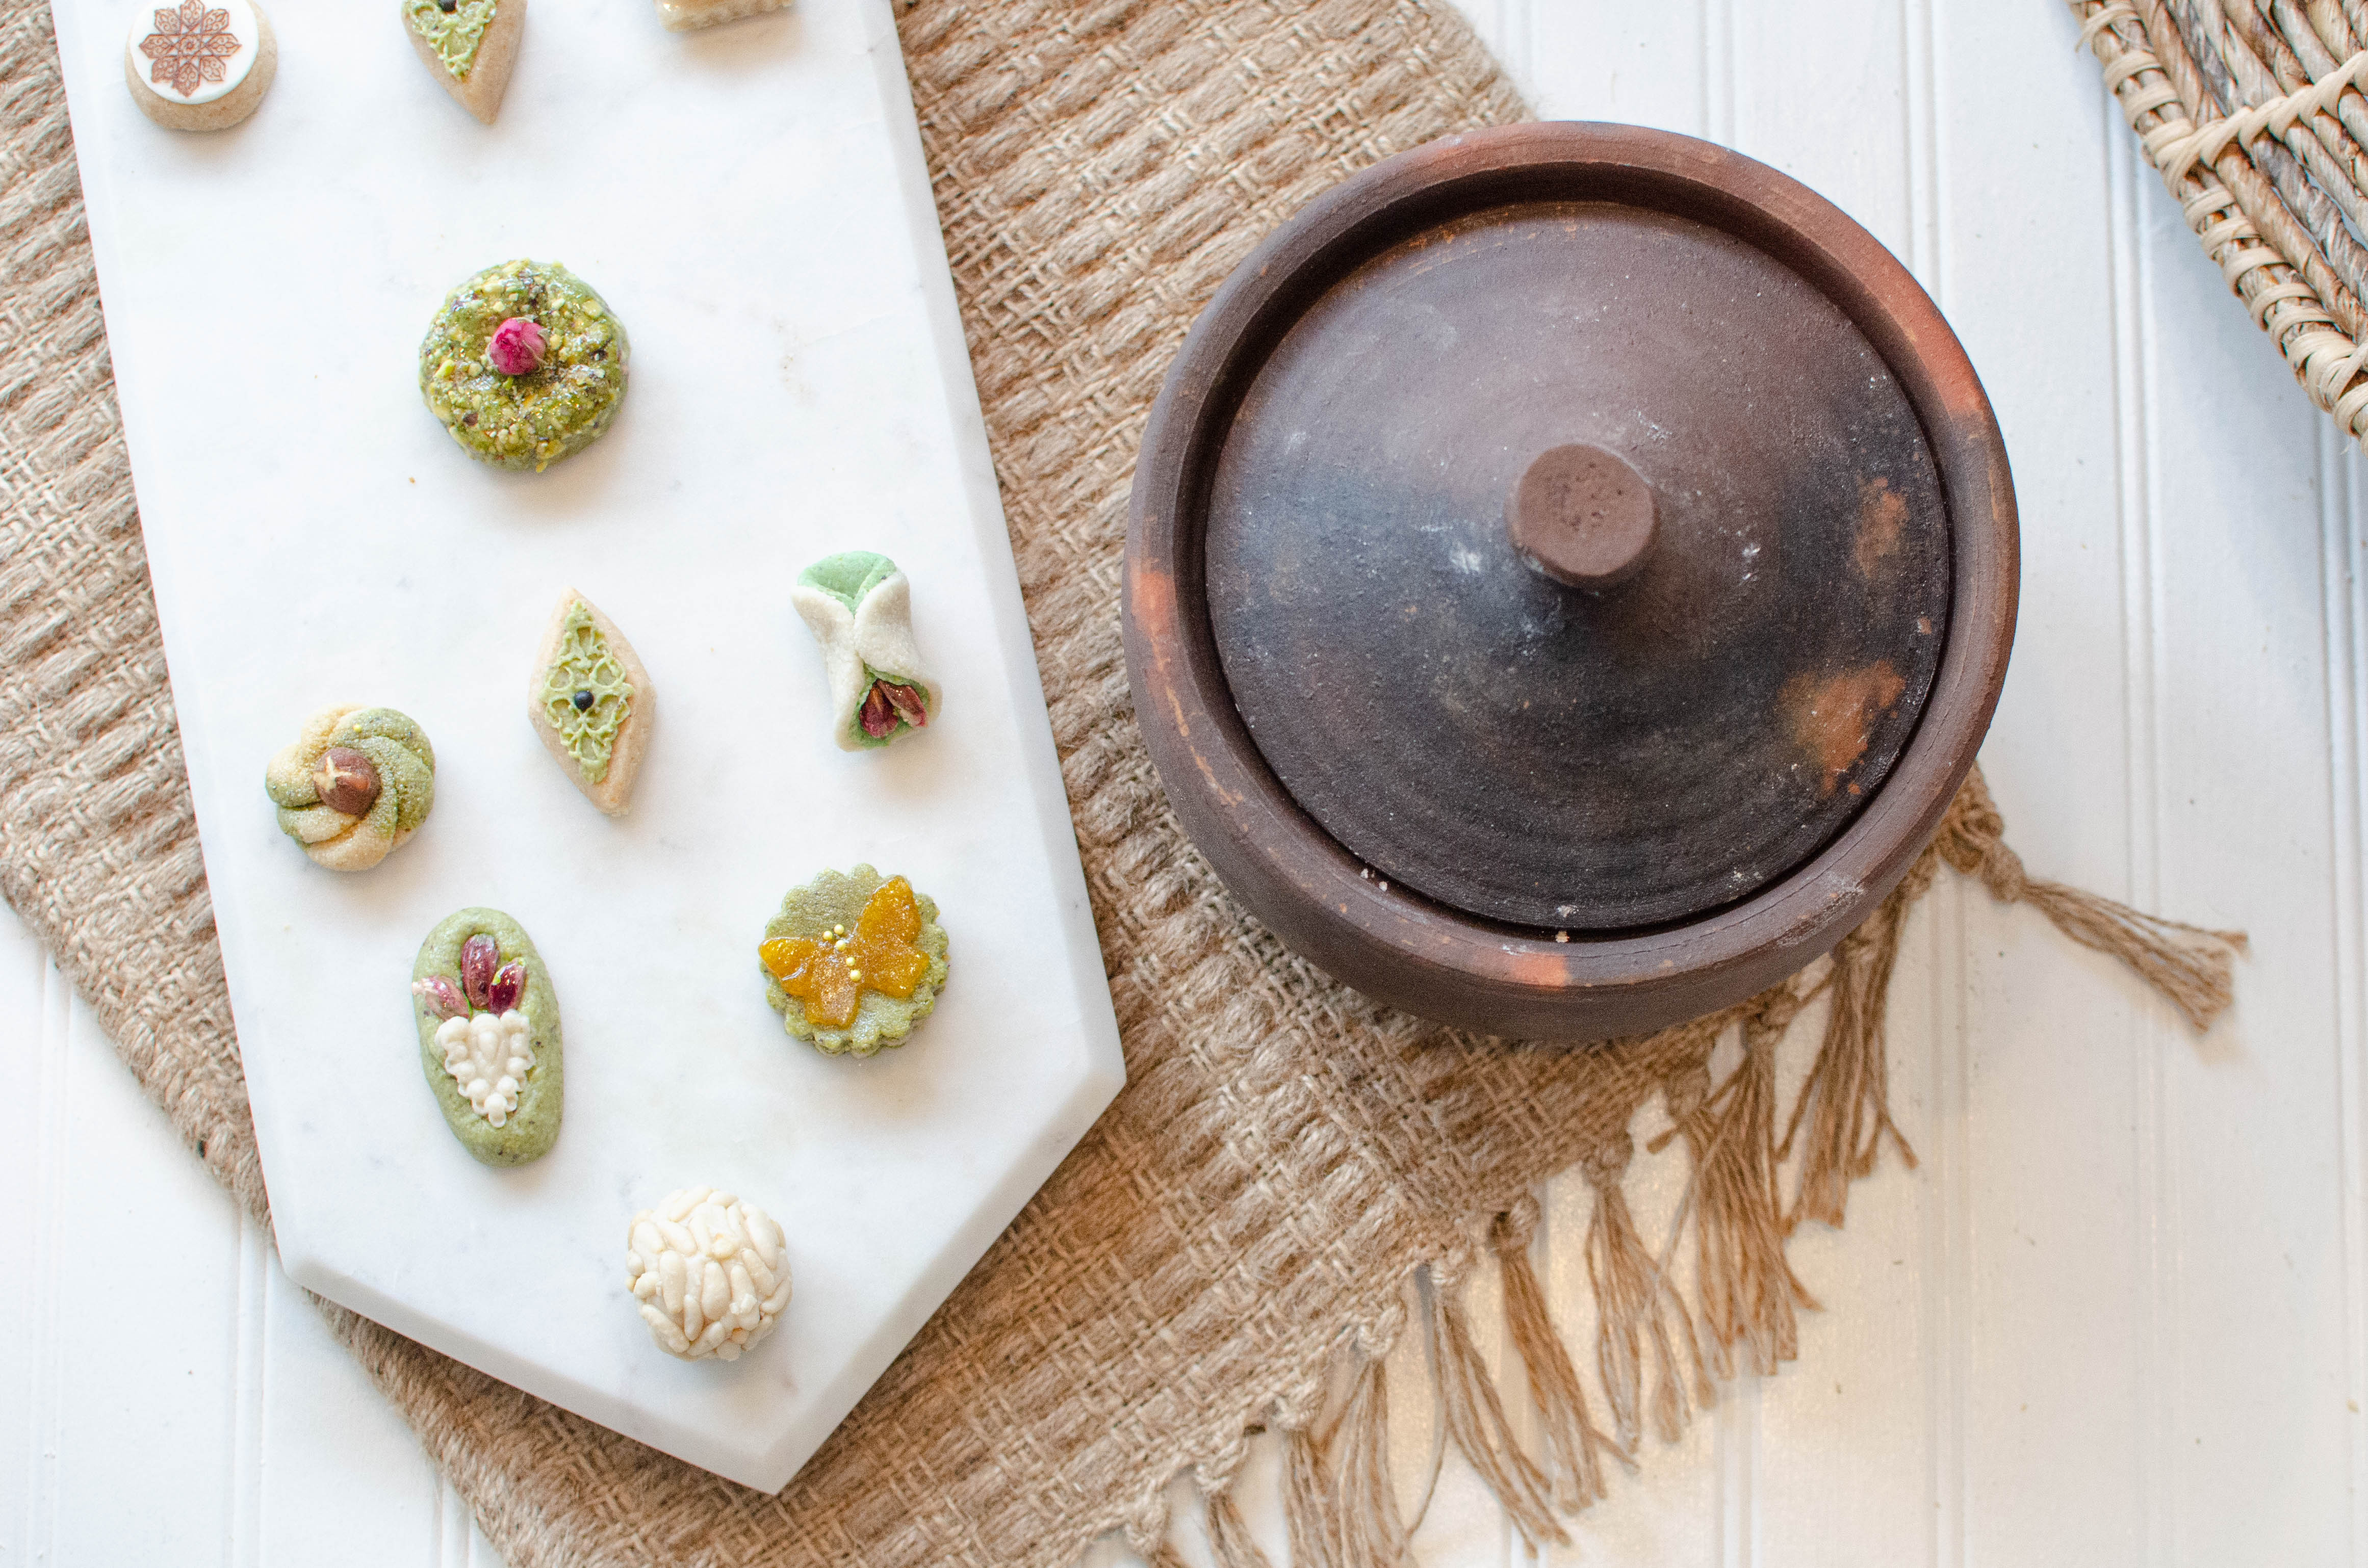 Small artistic-looking pastries made of pistachios, pinenuts, dried roses, and more are displayed on a white marble board.